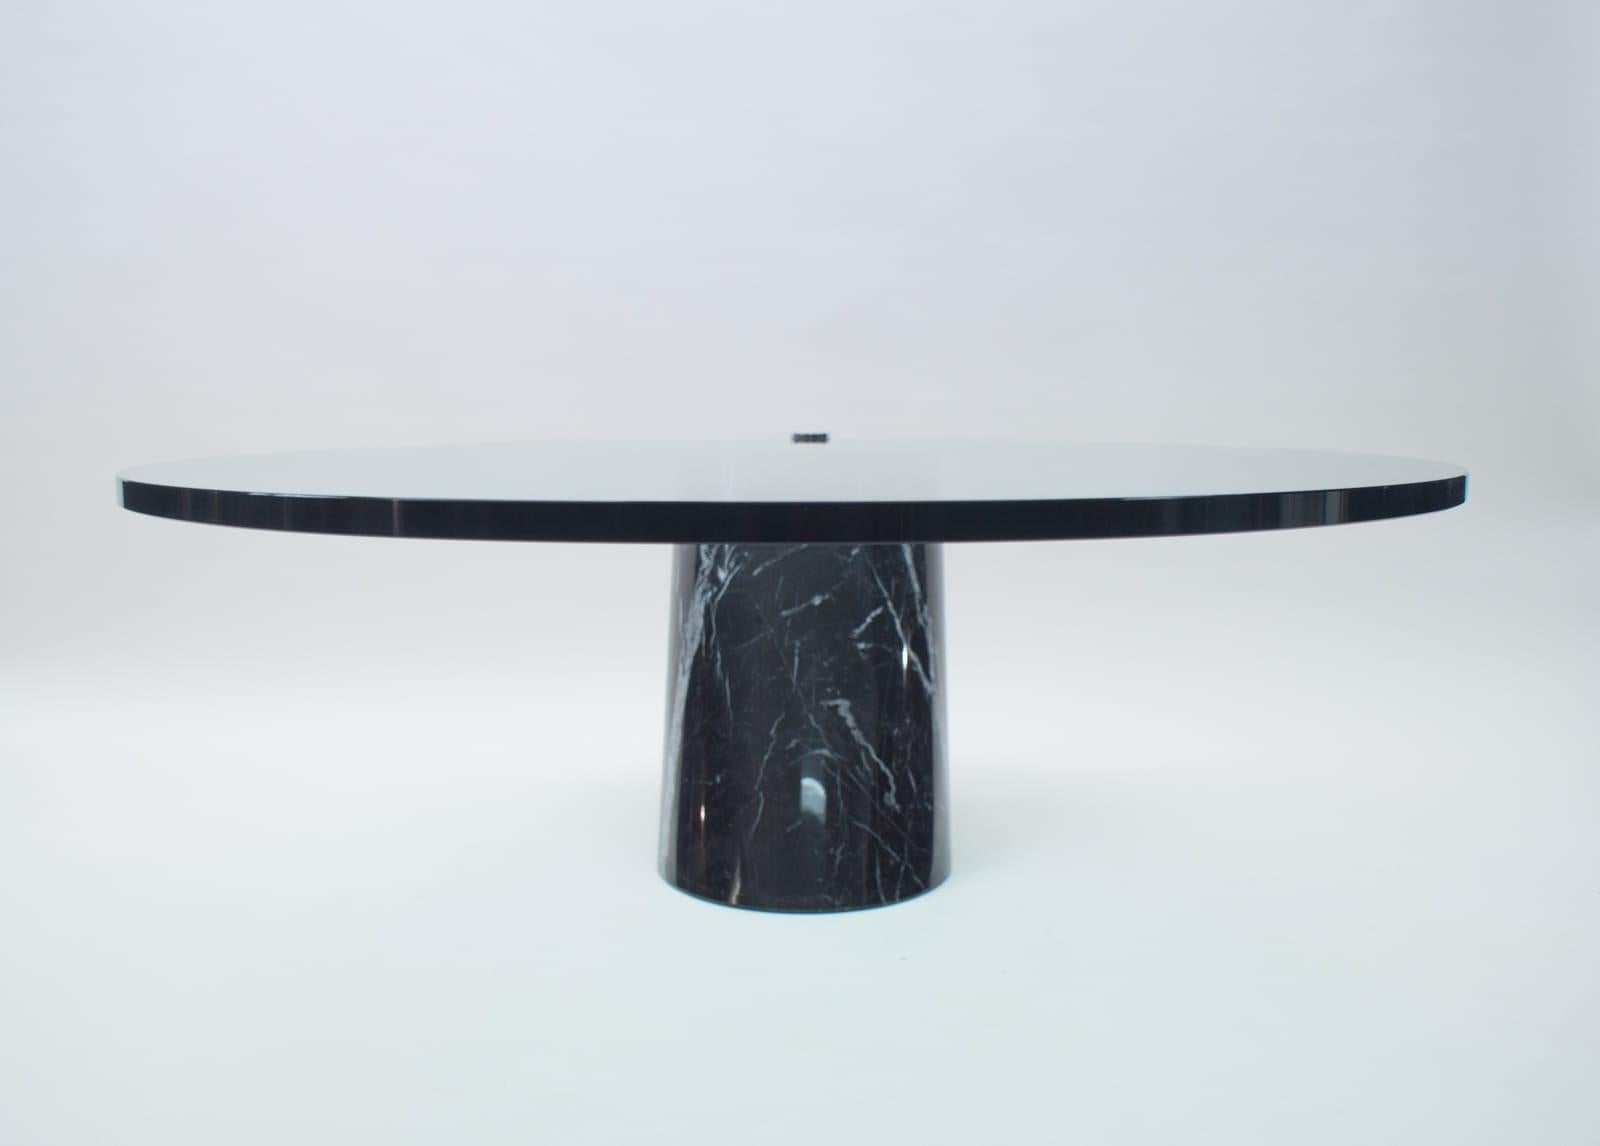 Metal Black Marble and Glass Coffee Table Model K1000 by Team Form for Ronald Schmitt